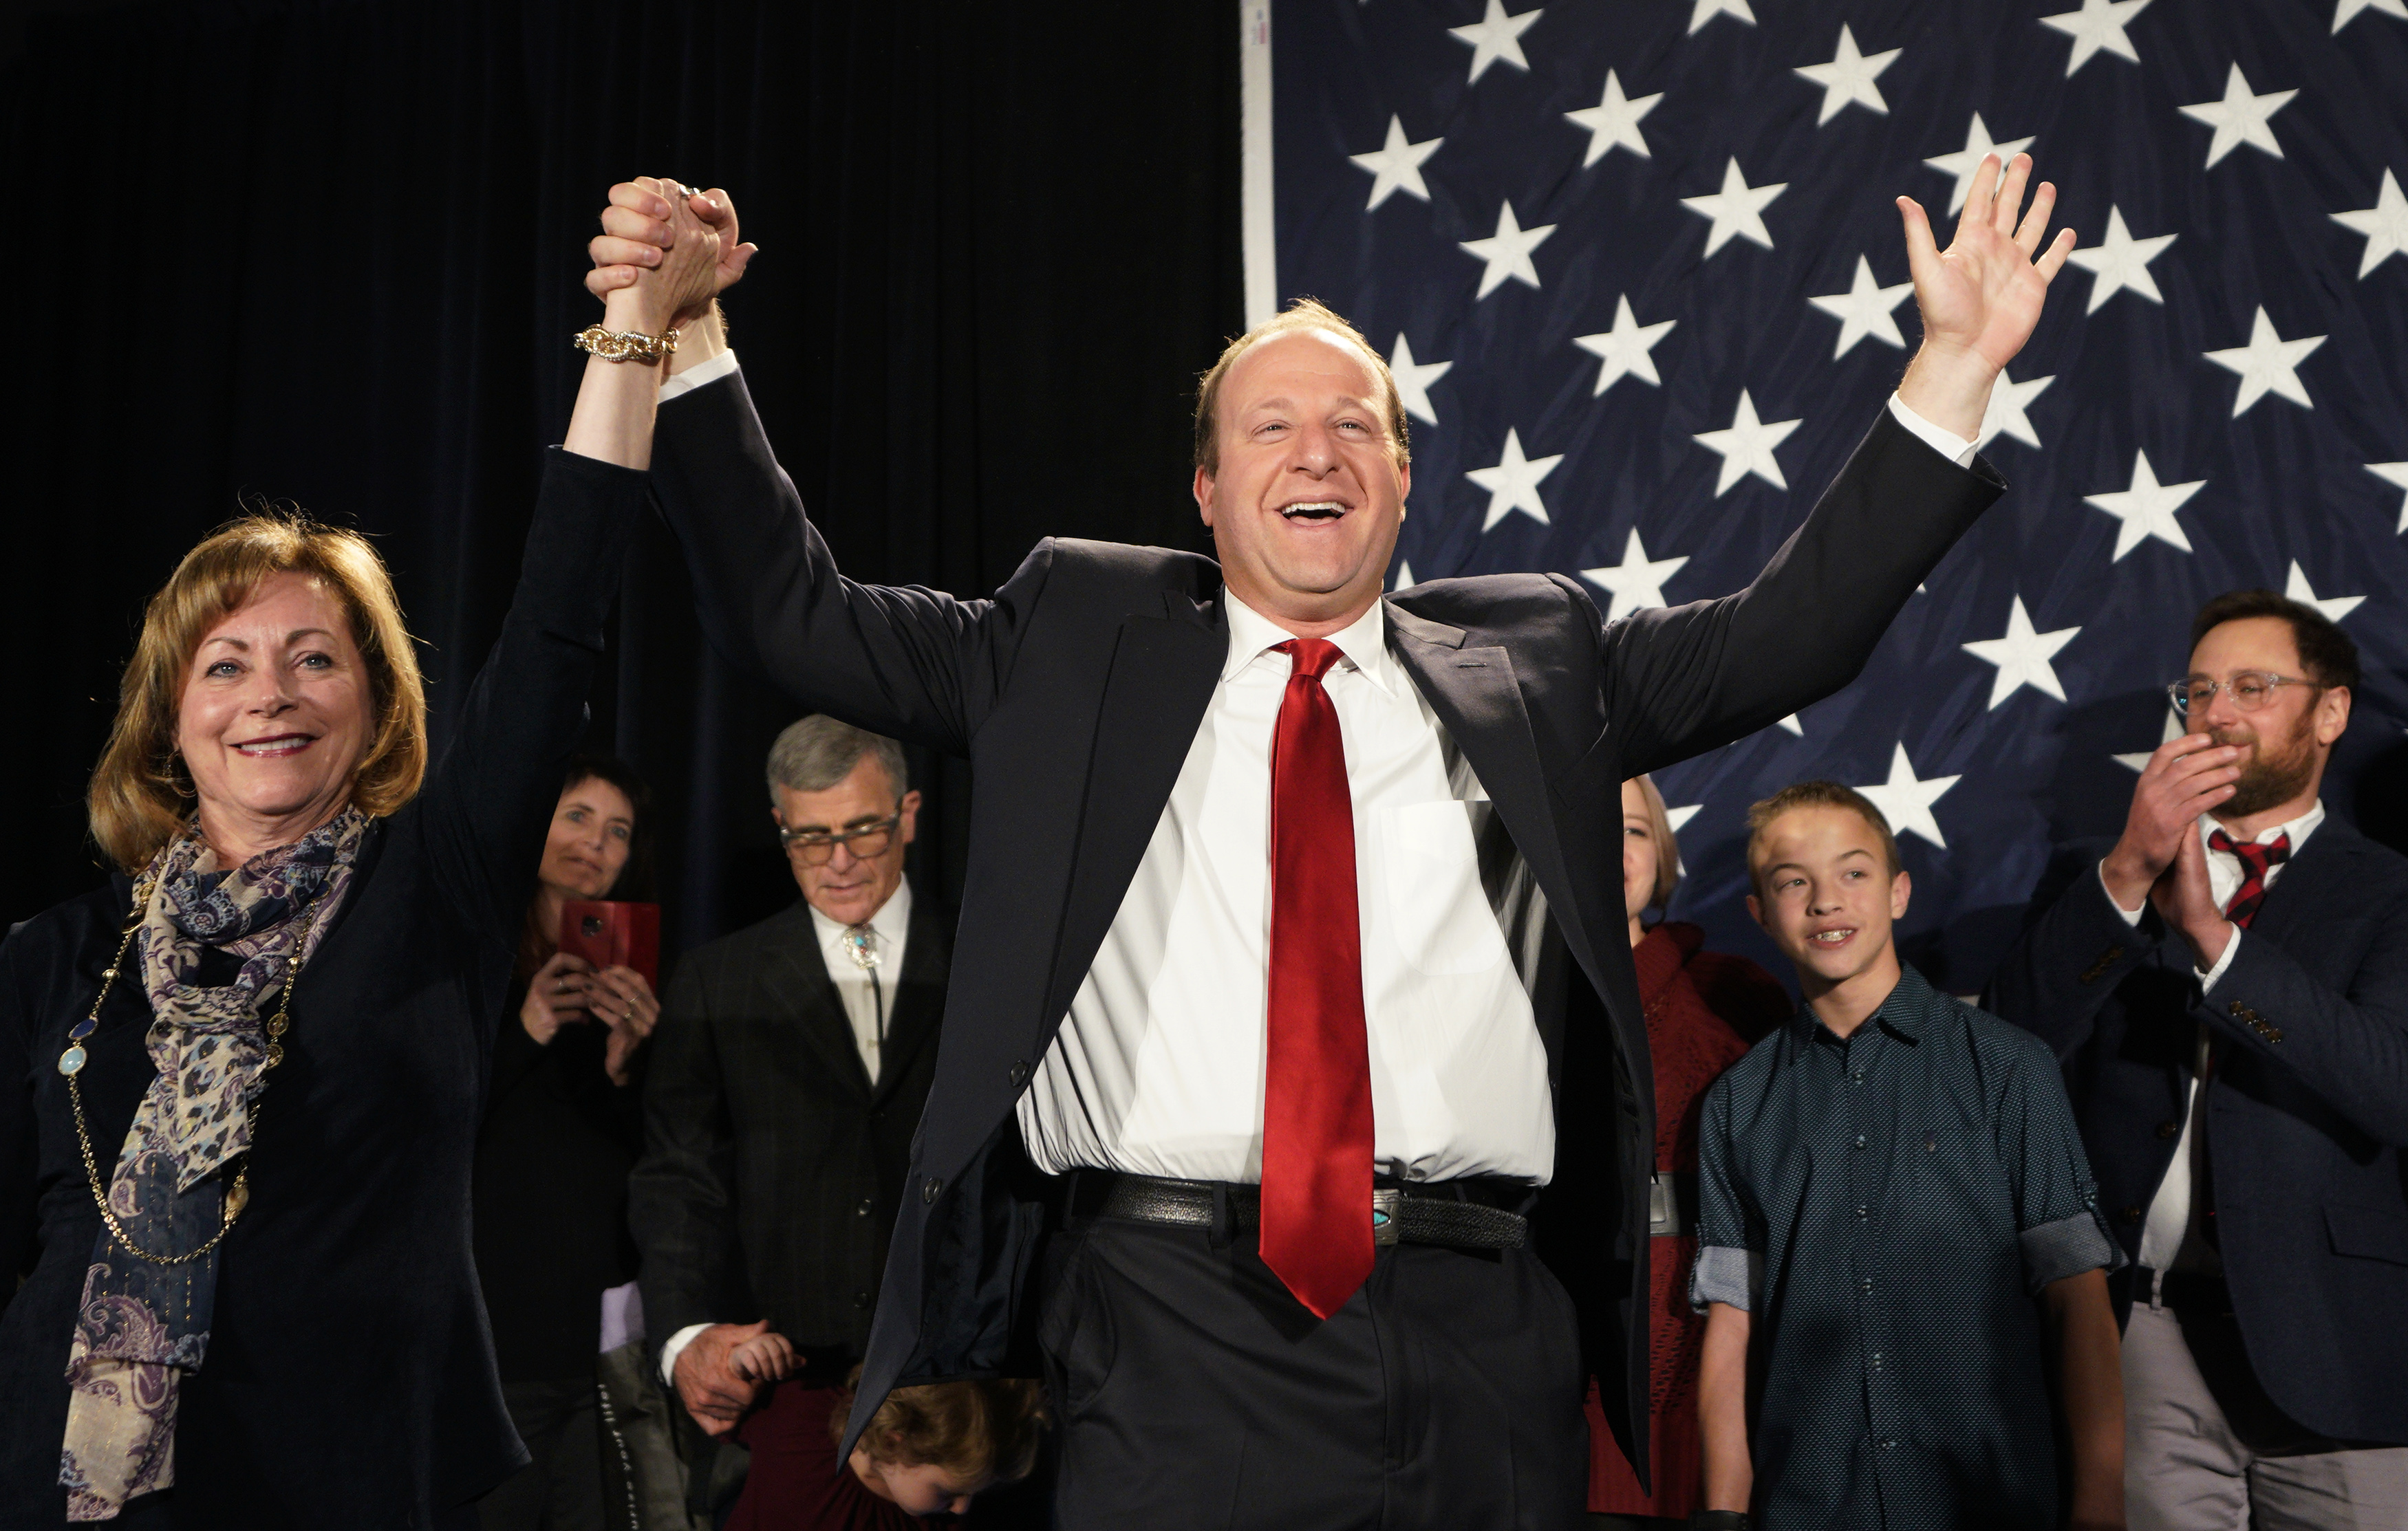 Democratic Colorado Governor-elect Jared Polis arrives onstage with running mate Dianne Primavera on November 6, 2018 in Denver, Colorado. (Rick T. Wilking&mdash;Getty Images)